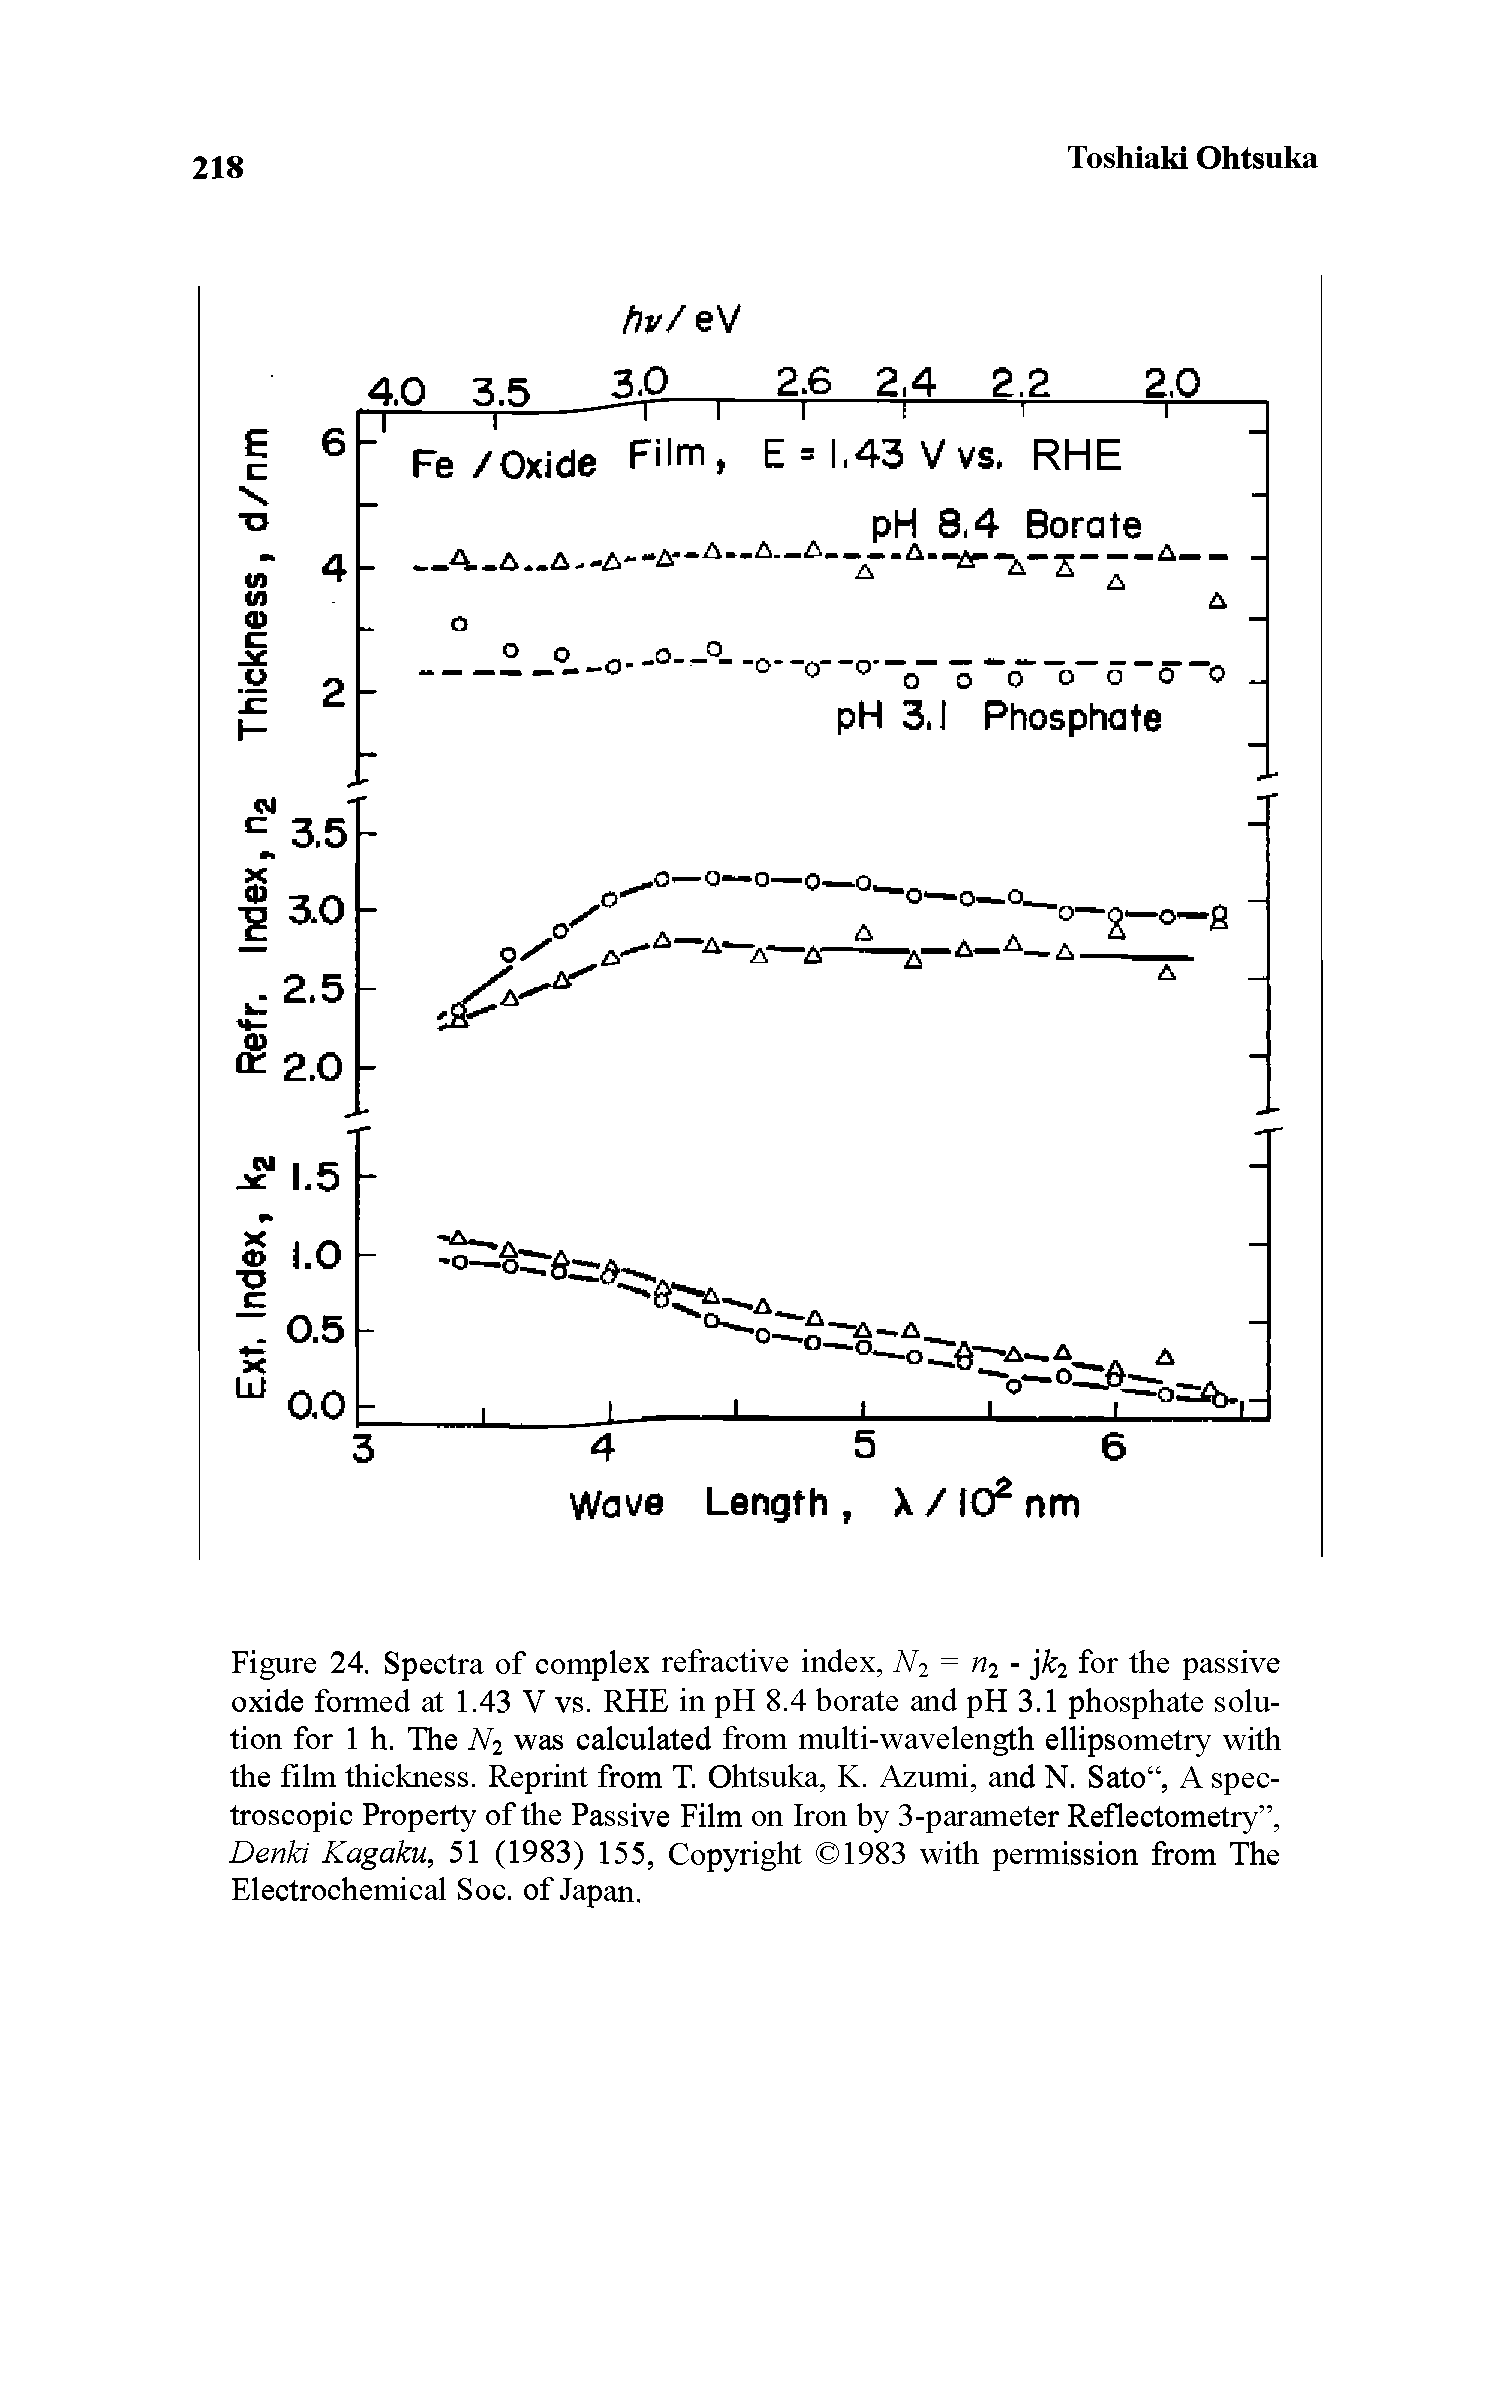 Figure 24. Spectra of complex refractive index, 7 2 = 2 j 2 for th passive oxide formed at 1.43 V vs. RHE in pH 8.4 borate and pH 3.1 phosphate solution for 1 h. The Ni was calculated from multi-wavelength ellipsometry with the film thickness. Reprint from T. Ohtsuka, K. Azumi, and N. Sato , A spectroscopic Property of the Passive Film on Iron by 3-parameter Reflectometry , Denki Kagaku, 51 (1983) 155, Copyright 1983 with permission from The Electrochemical Soc. of Japan.